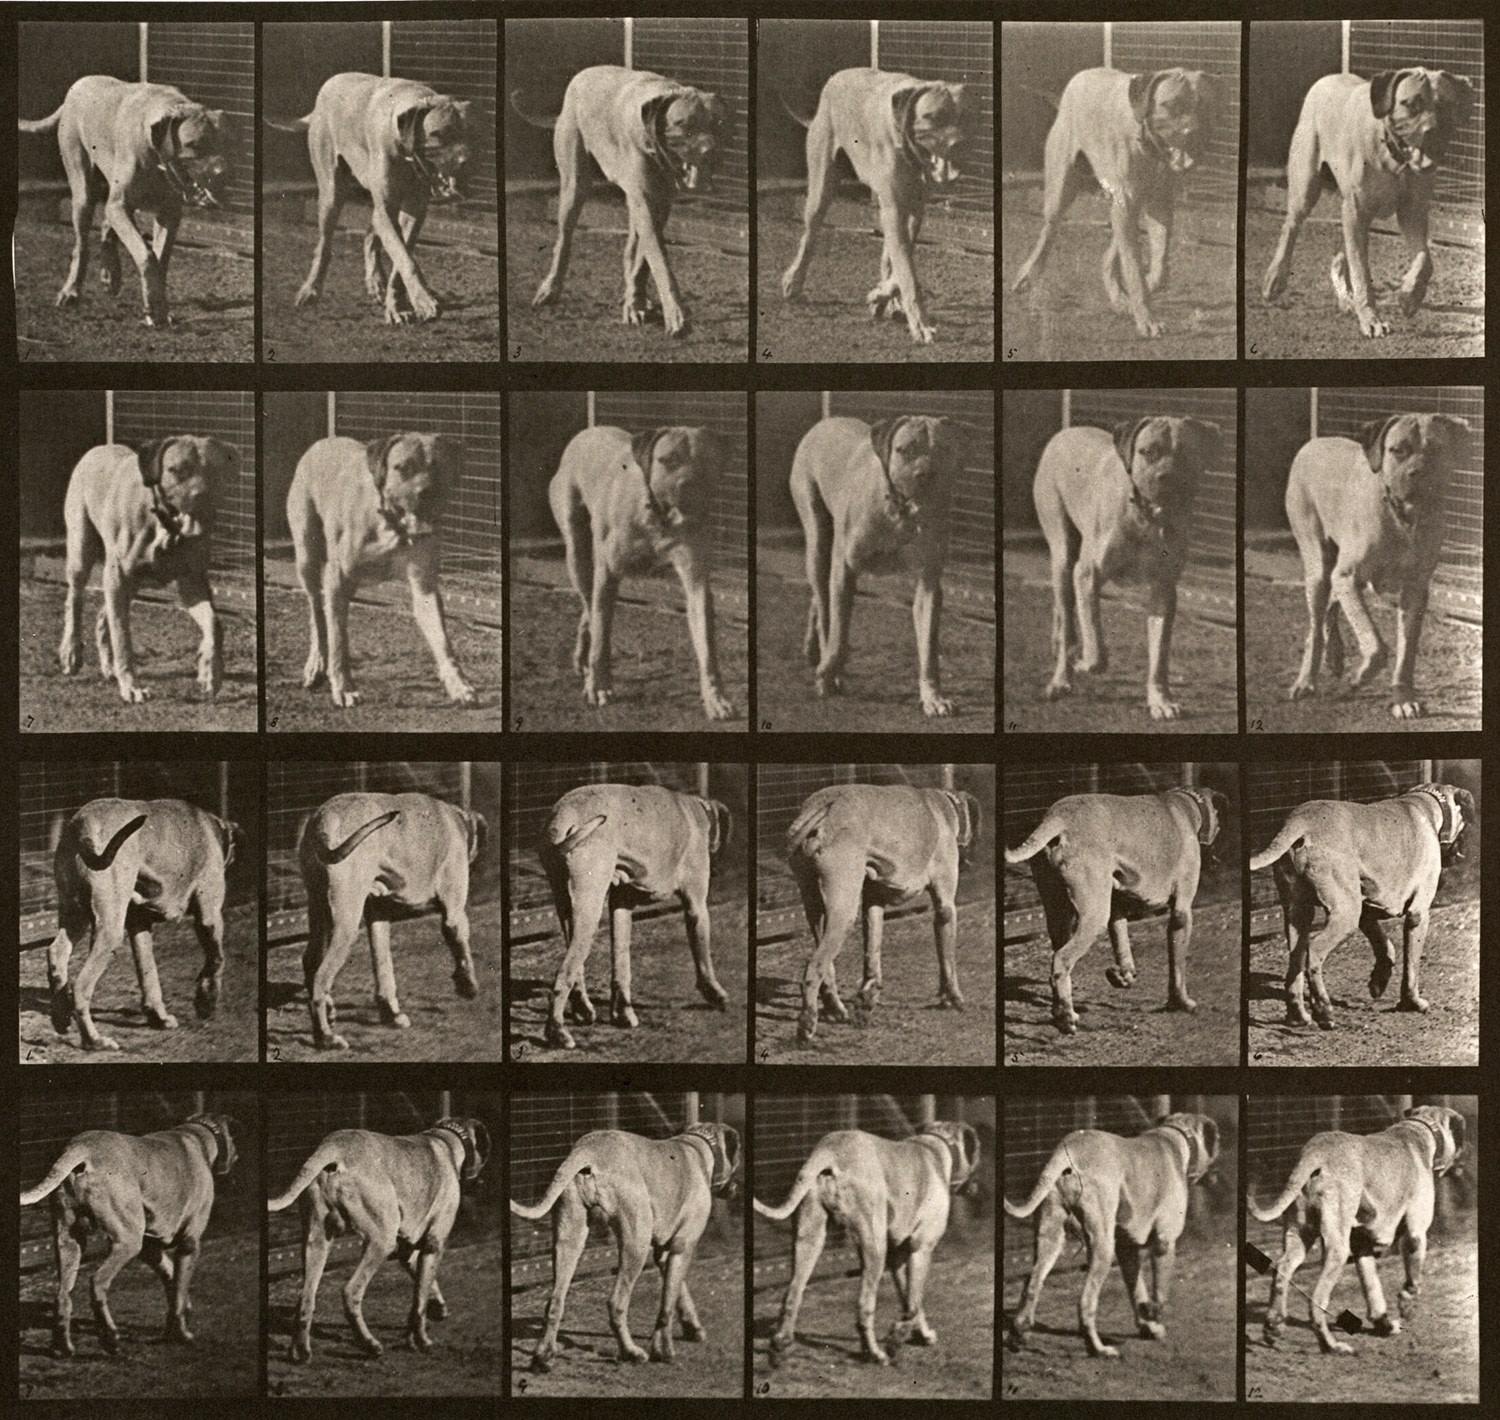 Sequence of black and white photos showing the movements of a walking mastiff dog